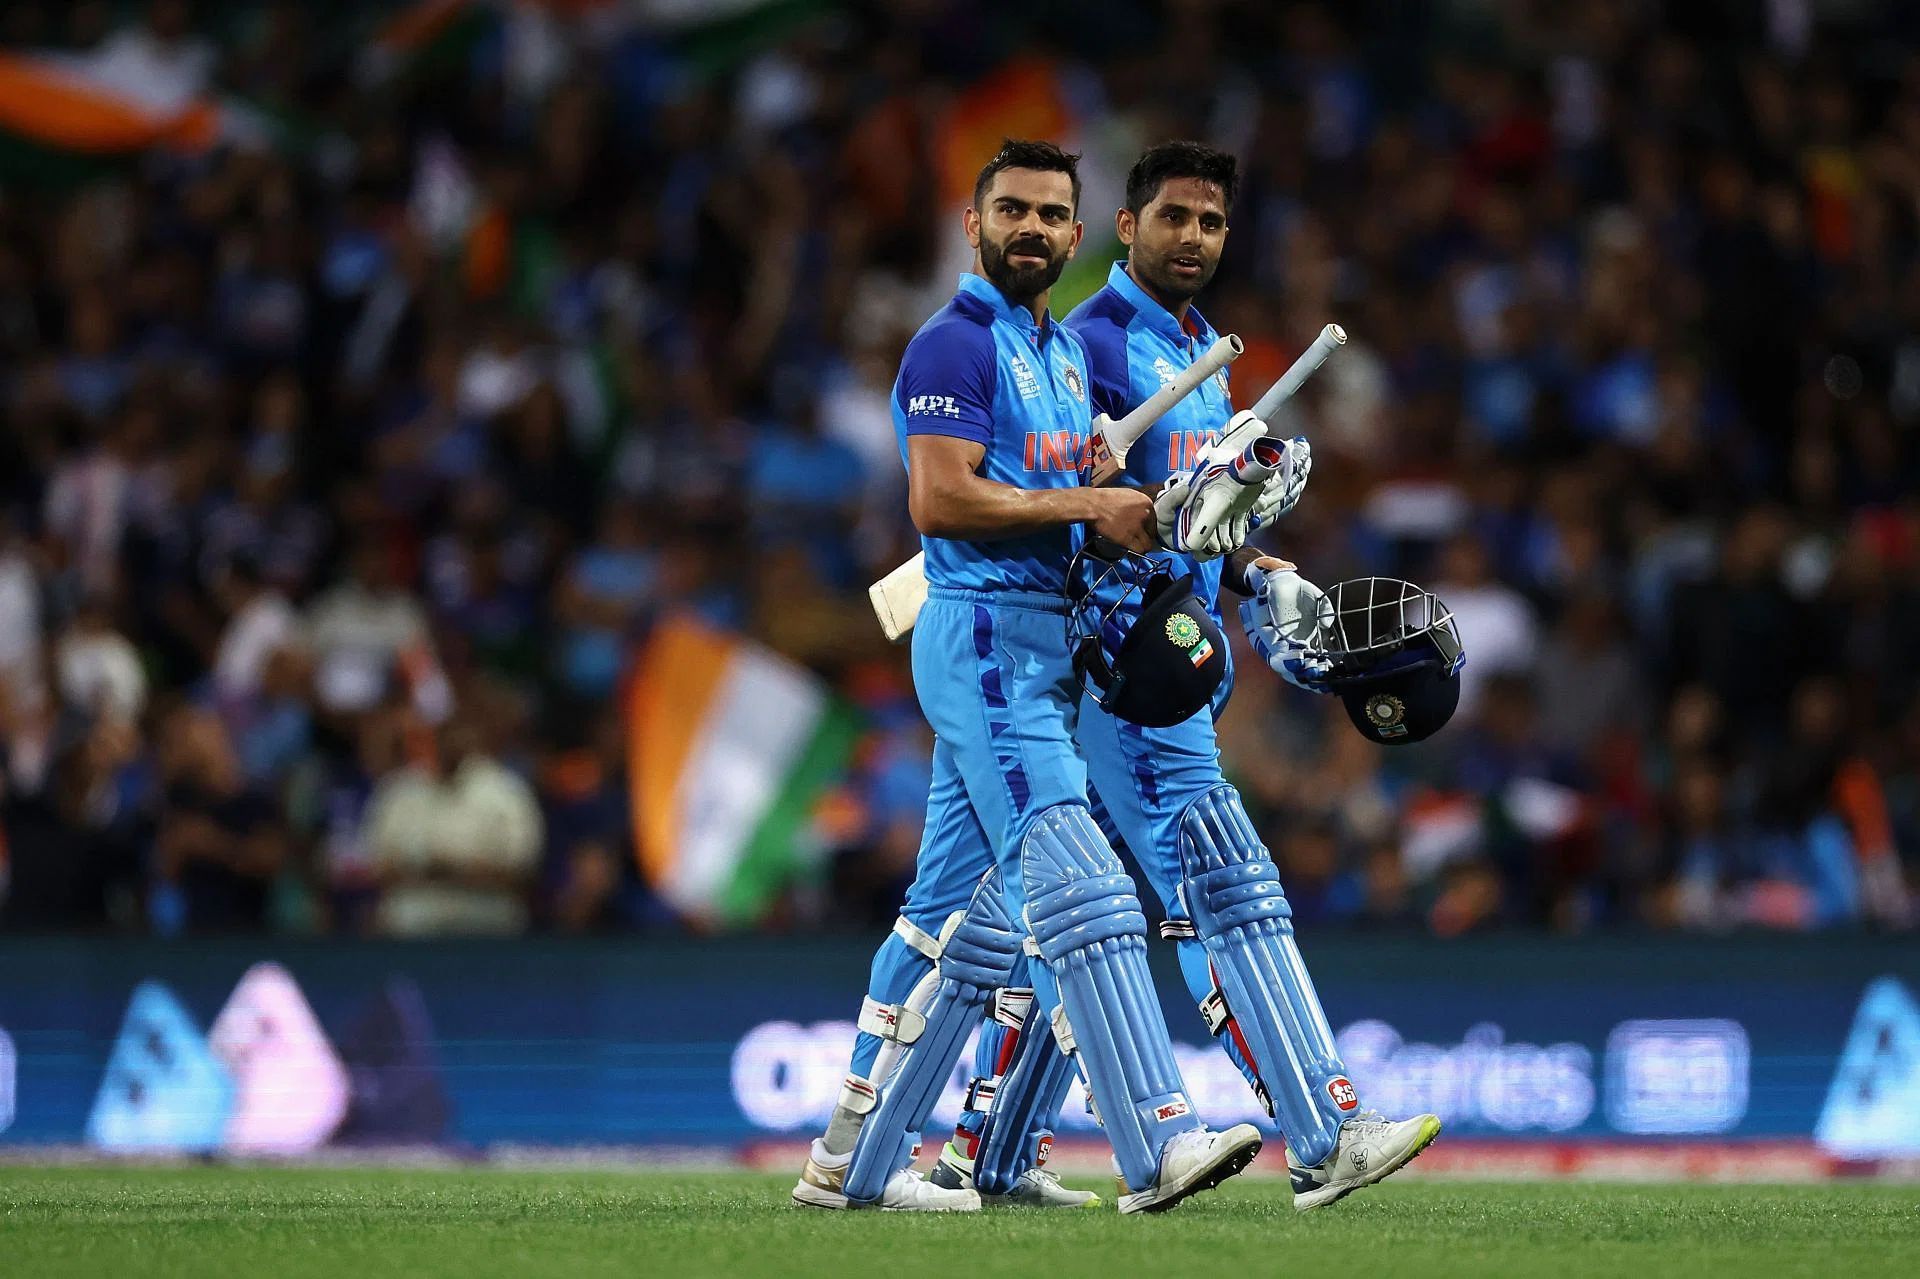 It was the VK-SKY show against the Netherlands. The duo added an unbeaten 95 for the third wicket as Kohli was unbeaten on 62 off 44, while Suryakumar thumped 51* in 25. Pic: Getty Images